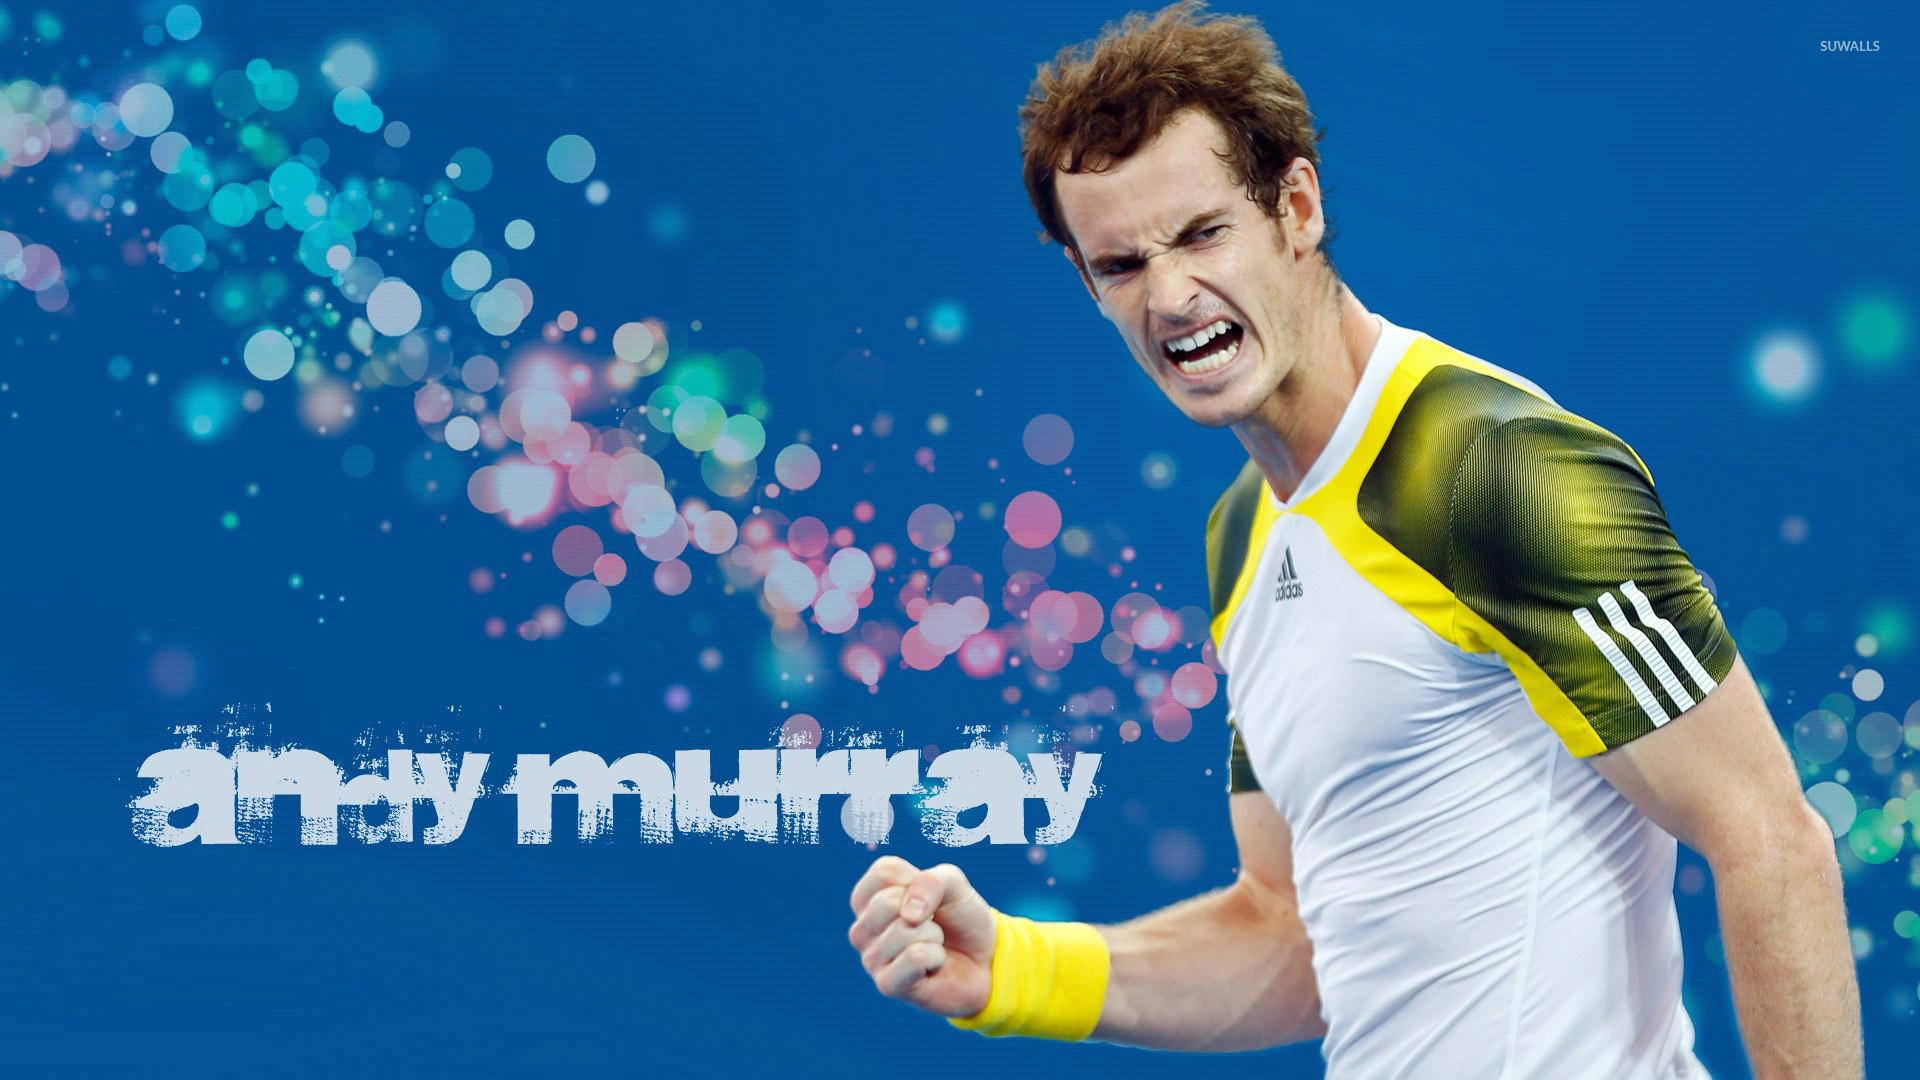 Andy Murray Colorful Fan Art Background